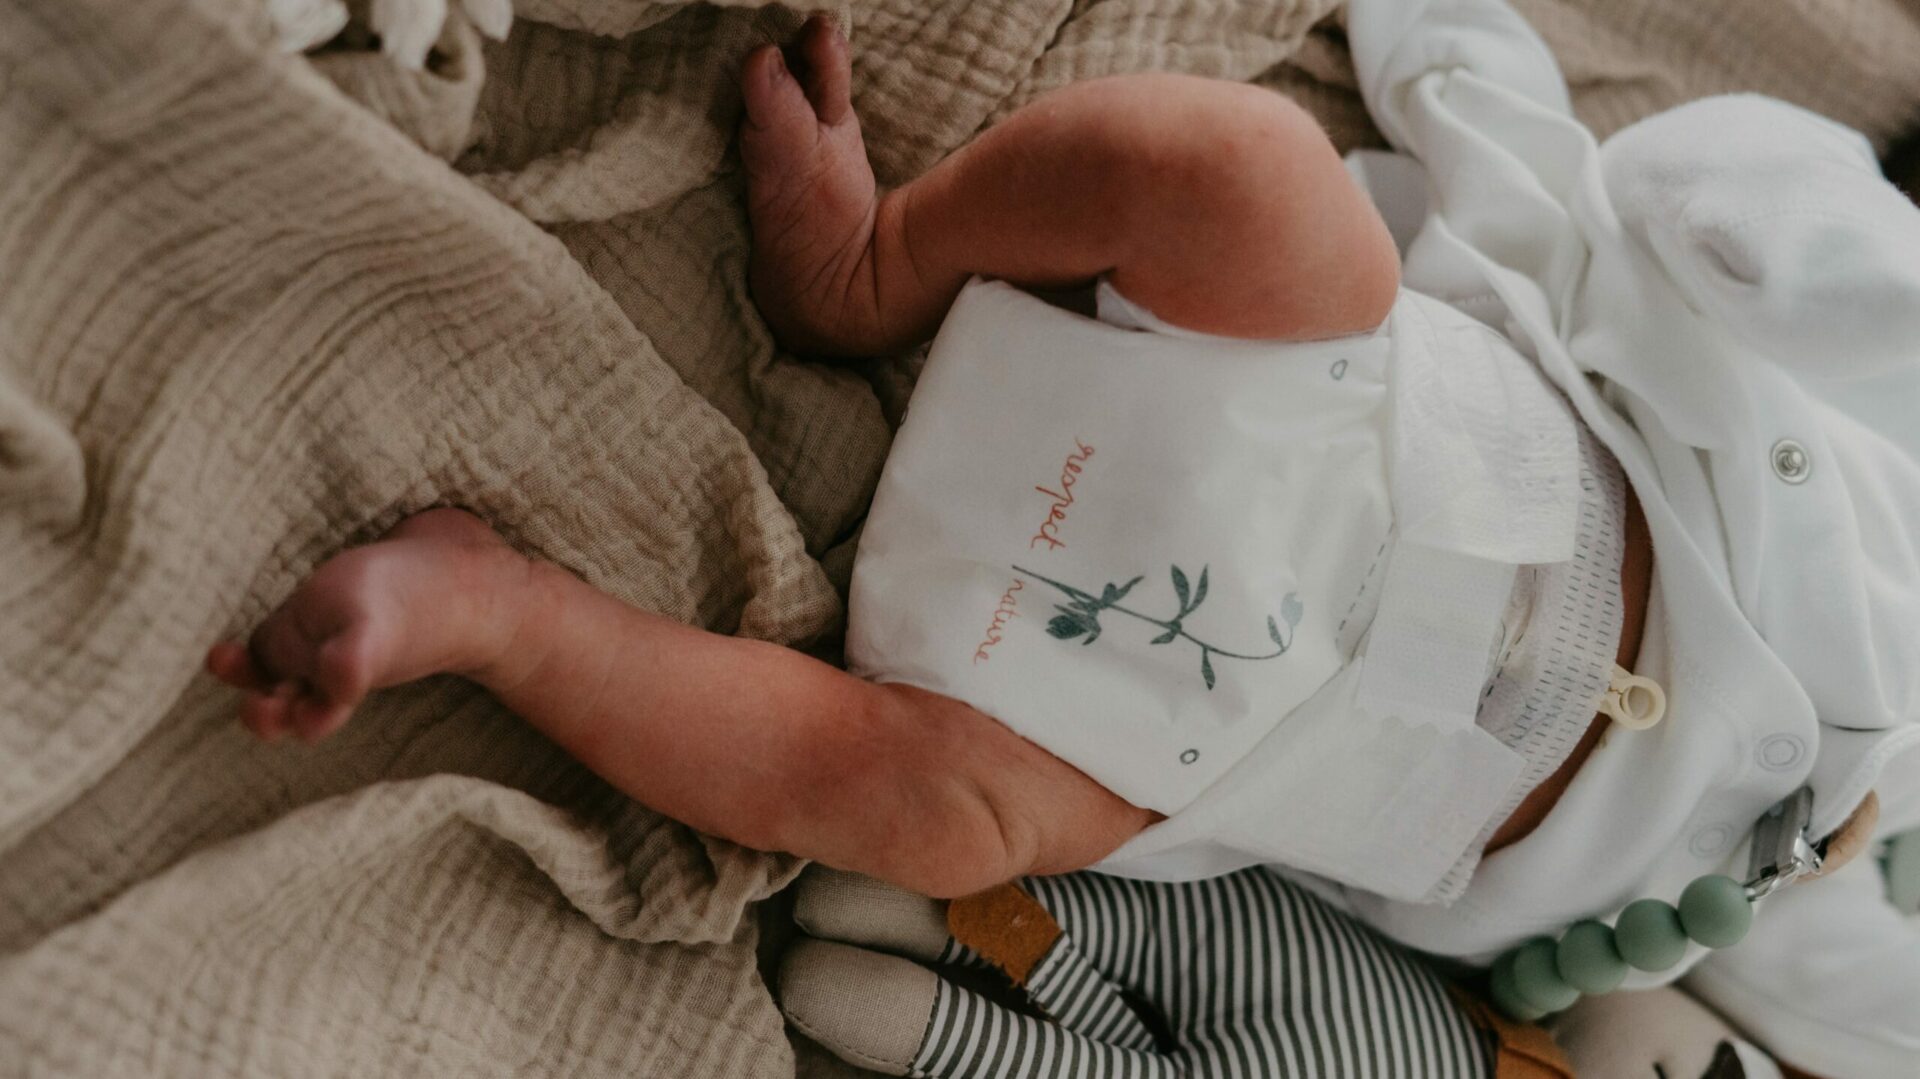 8 All-natural Diaper Rash Creams for Your Little One